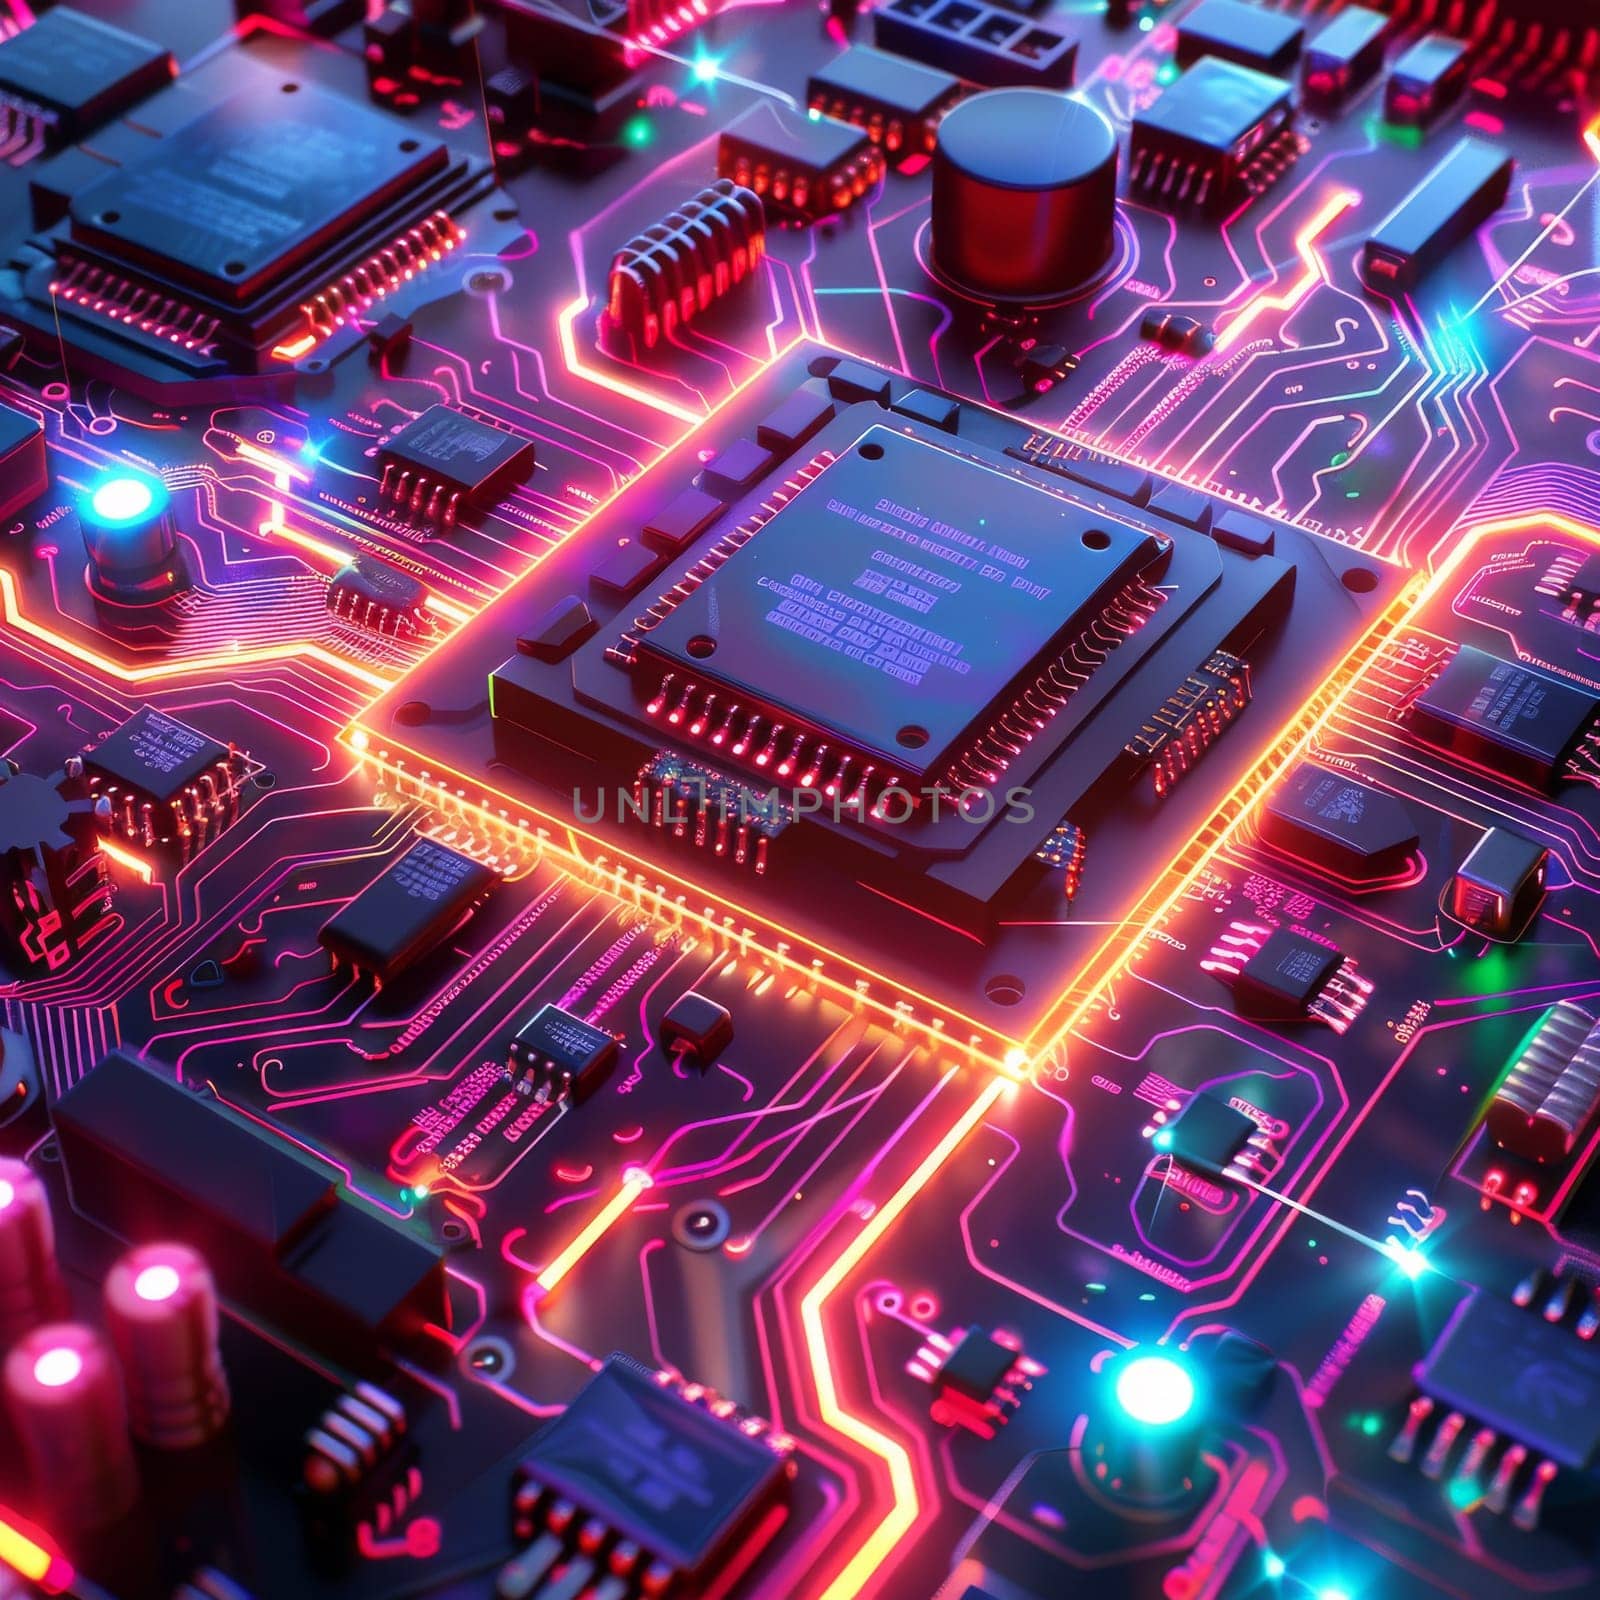 A close up of a circuit board with blue and orange lights. Concept of complexity and sophistication, as the intricate design of the circuit board suggests a high level of technical expertise